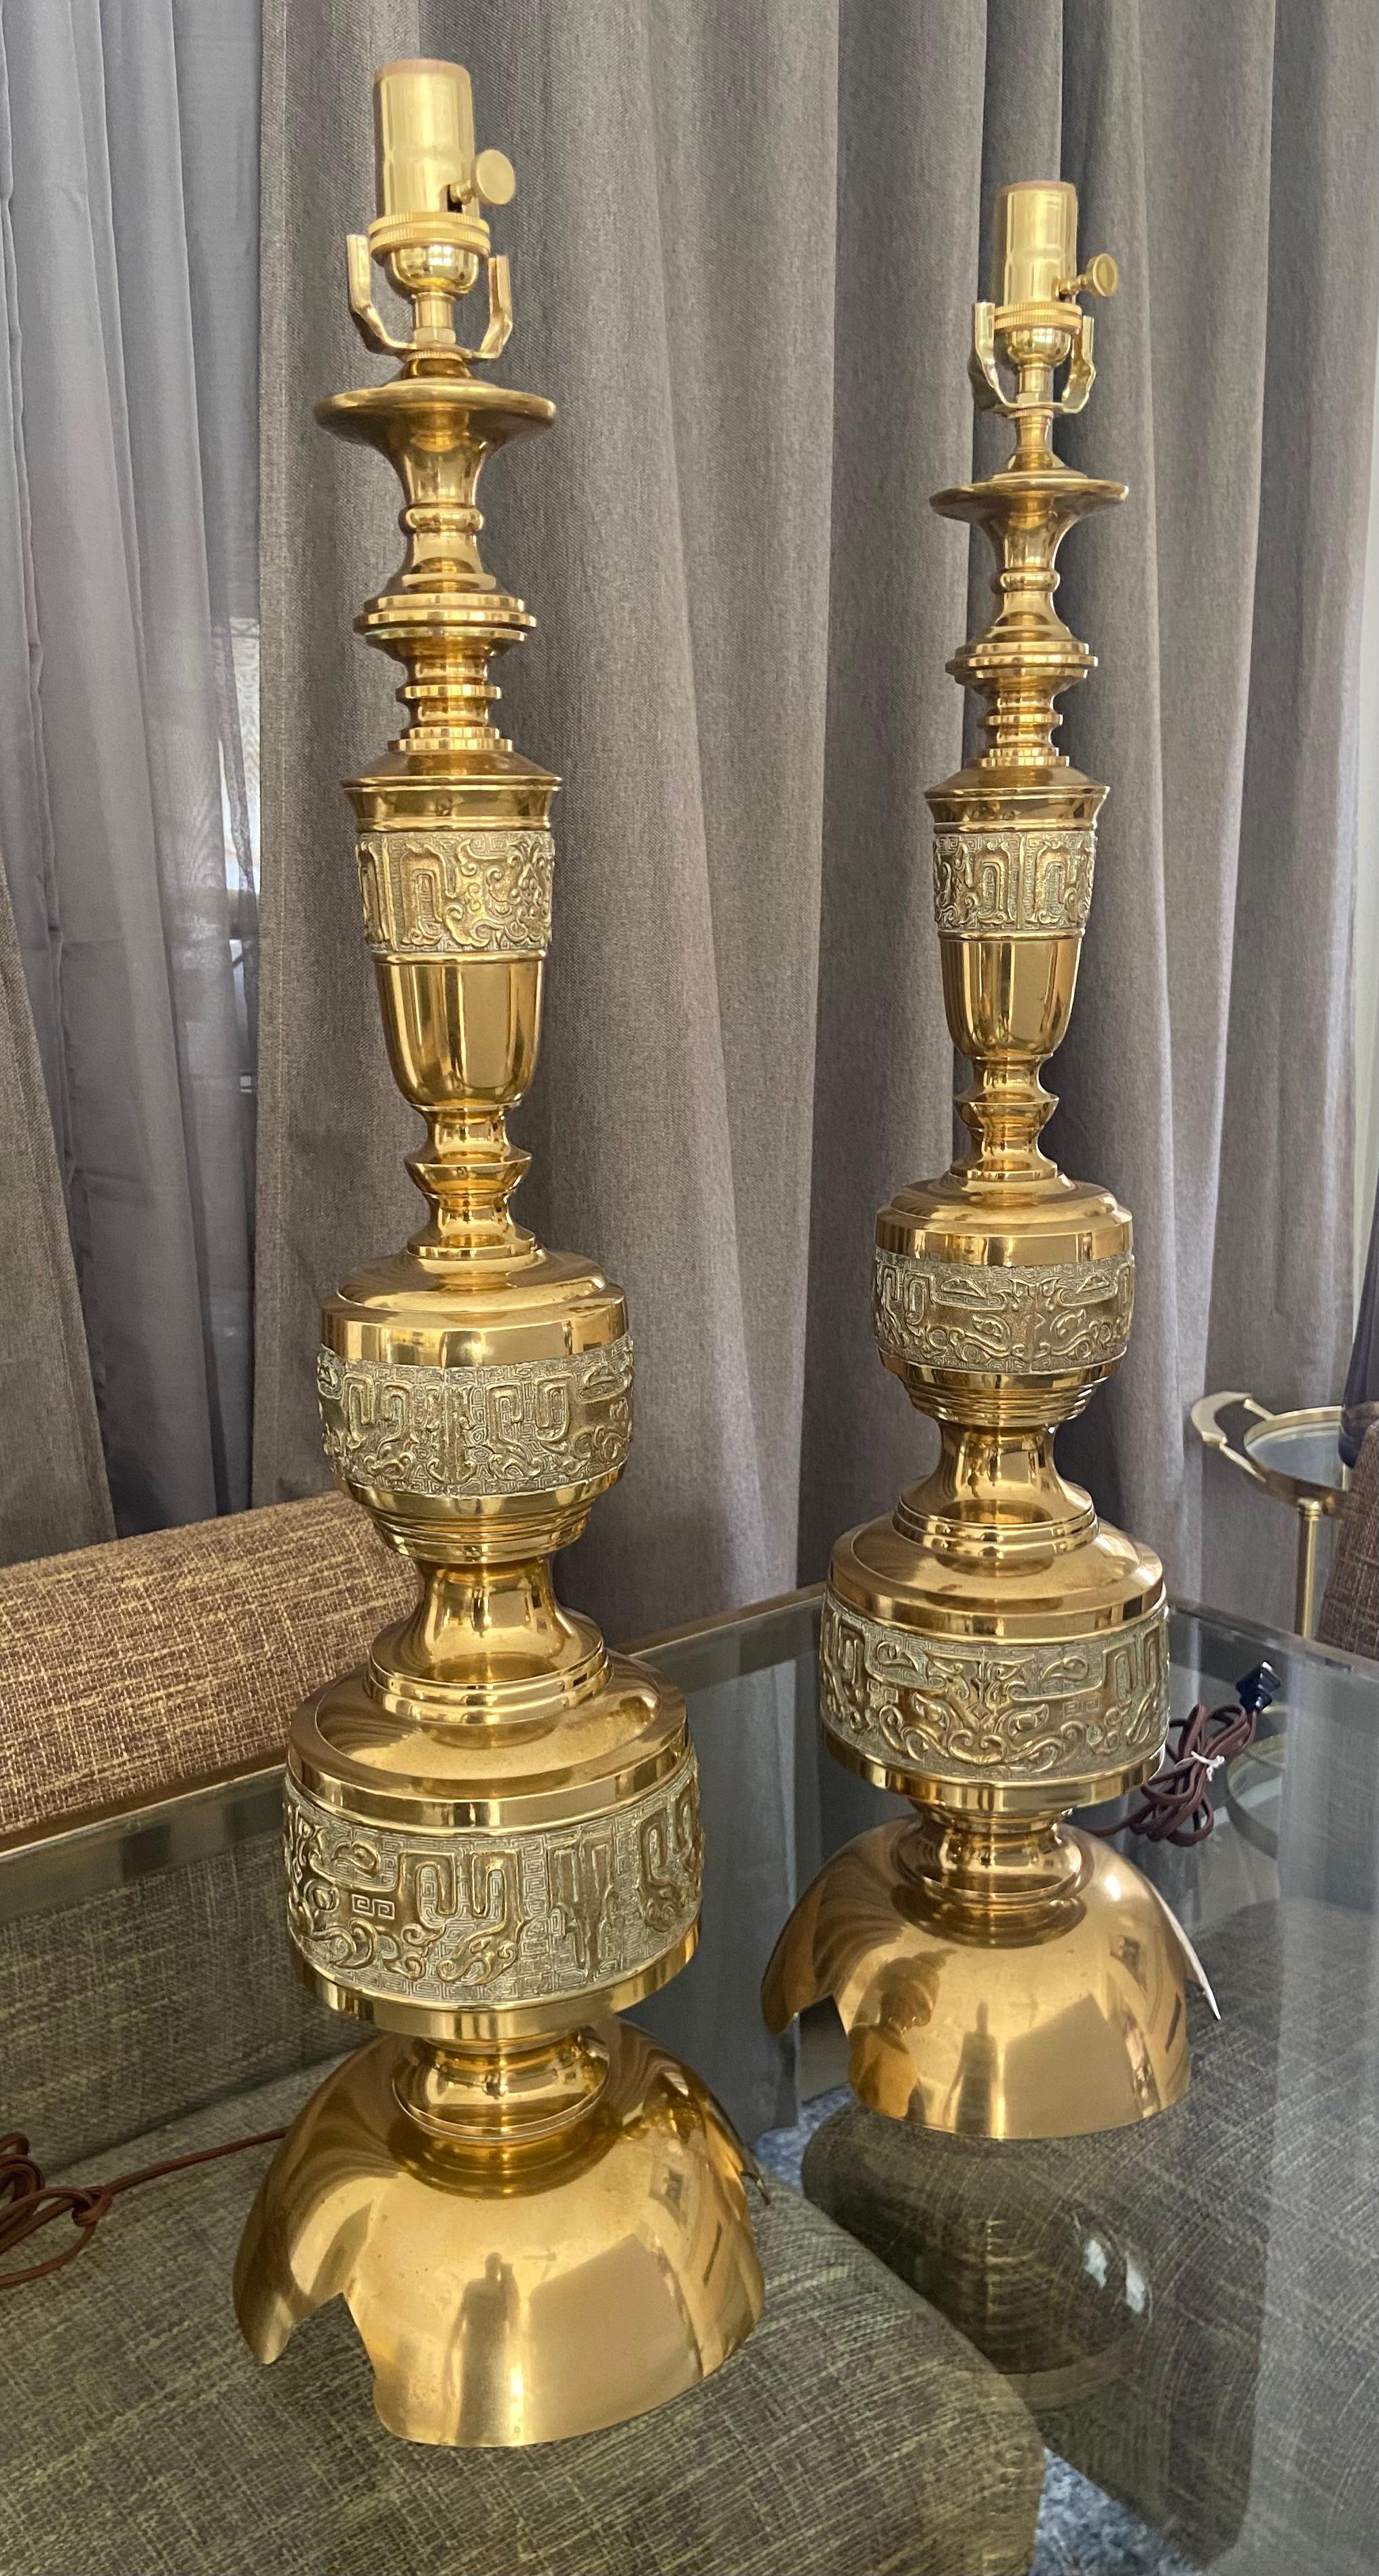 Pair of James Mont Asian Inspired Brass Table Lamps In Good Condition For Sale In Palm Springs, CA